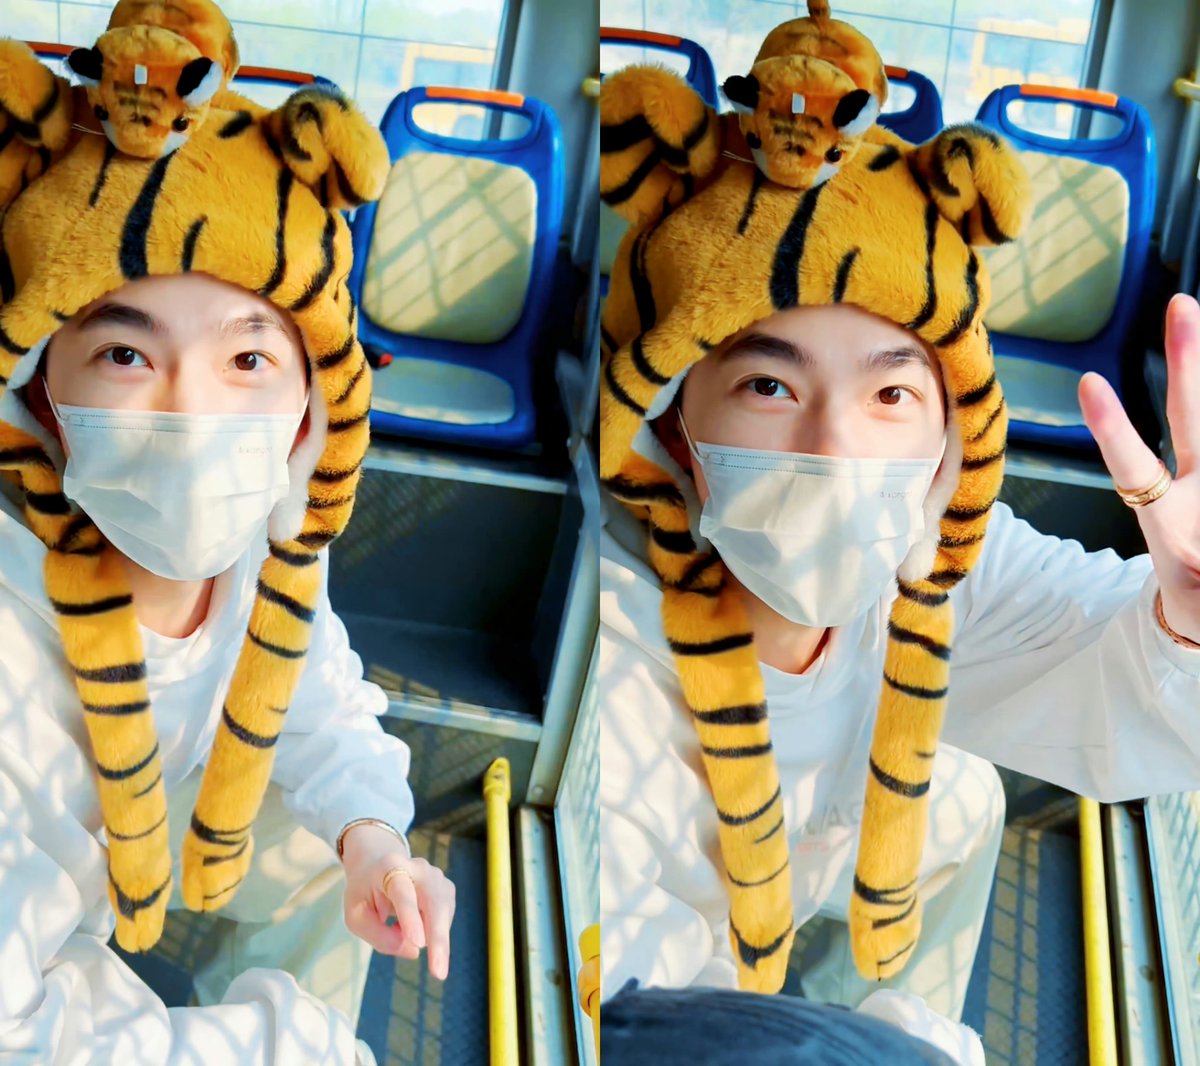 He didn't buy the tiger hat, it’s a souvenir from tiger park!

[From Pic] A staff: 
every time we receive (special guests) we’d give them souvenirs. but to help promoting us without any reservation, he was the first one I’ve ever seen

🥰❤️
#杨洋 #YangYang #YangYang杨洋 #หยางหยาง